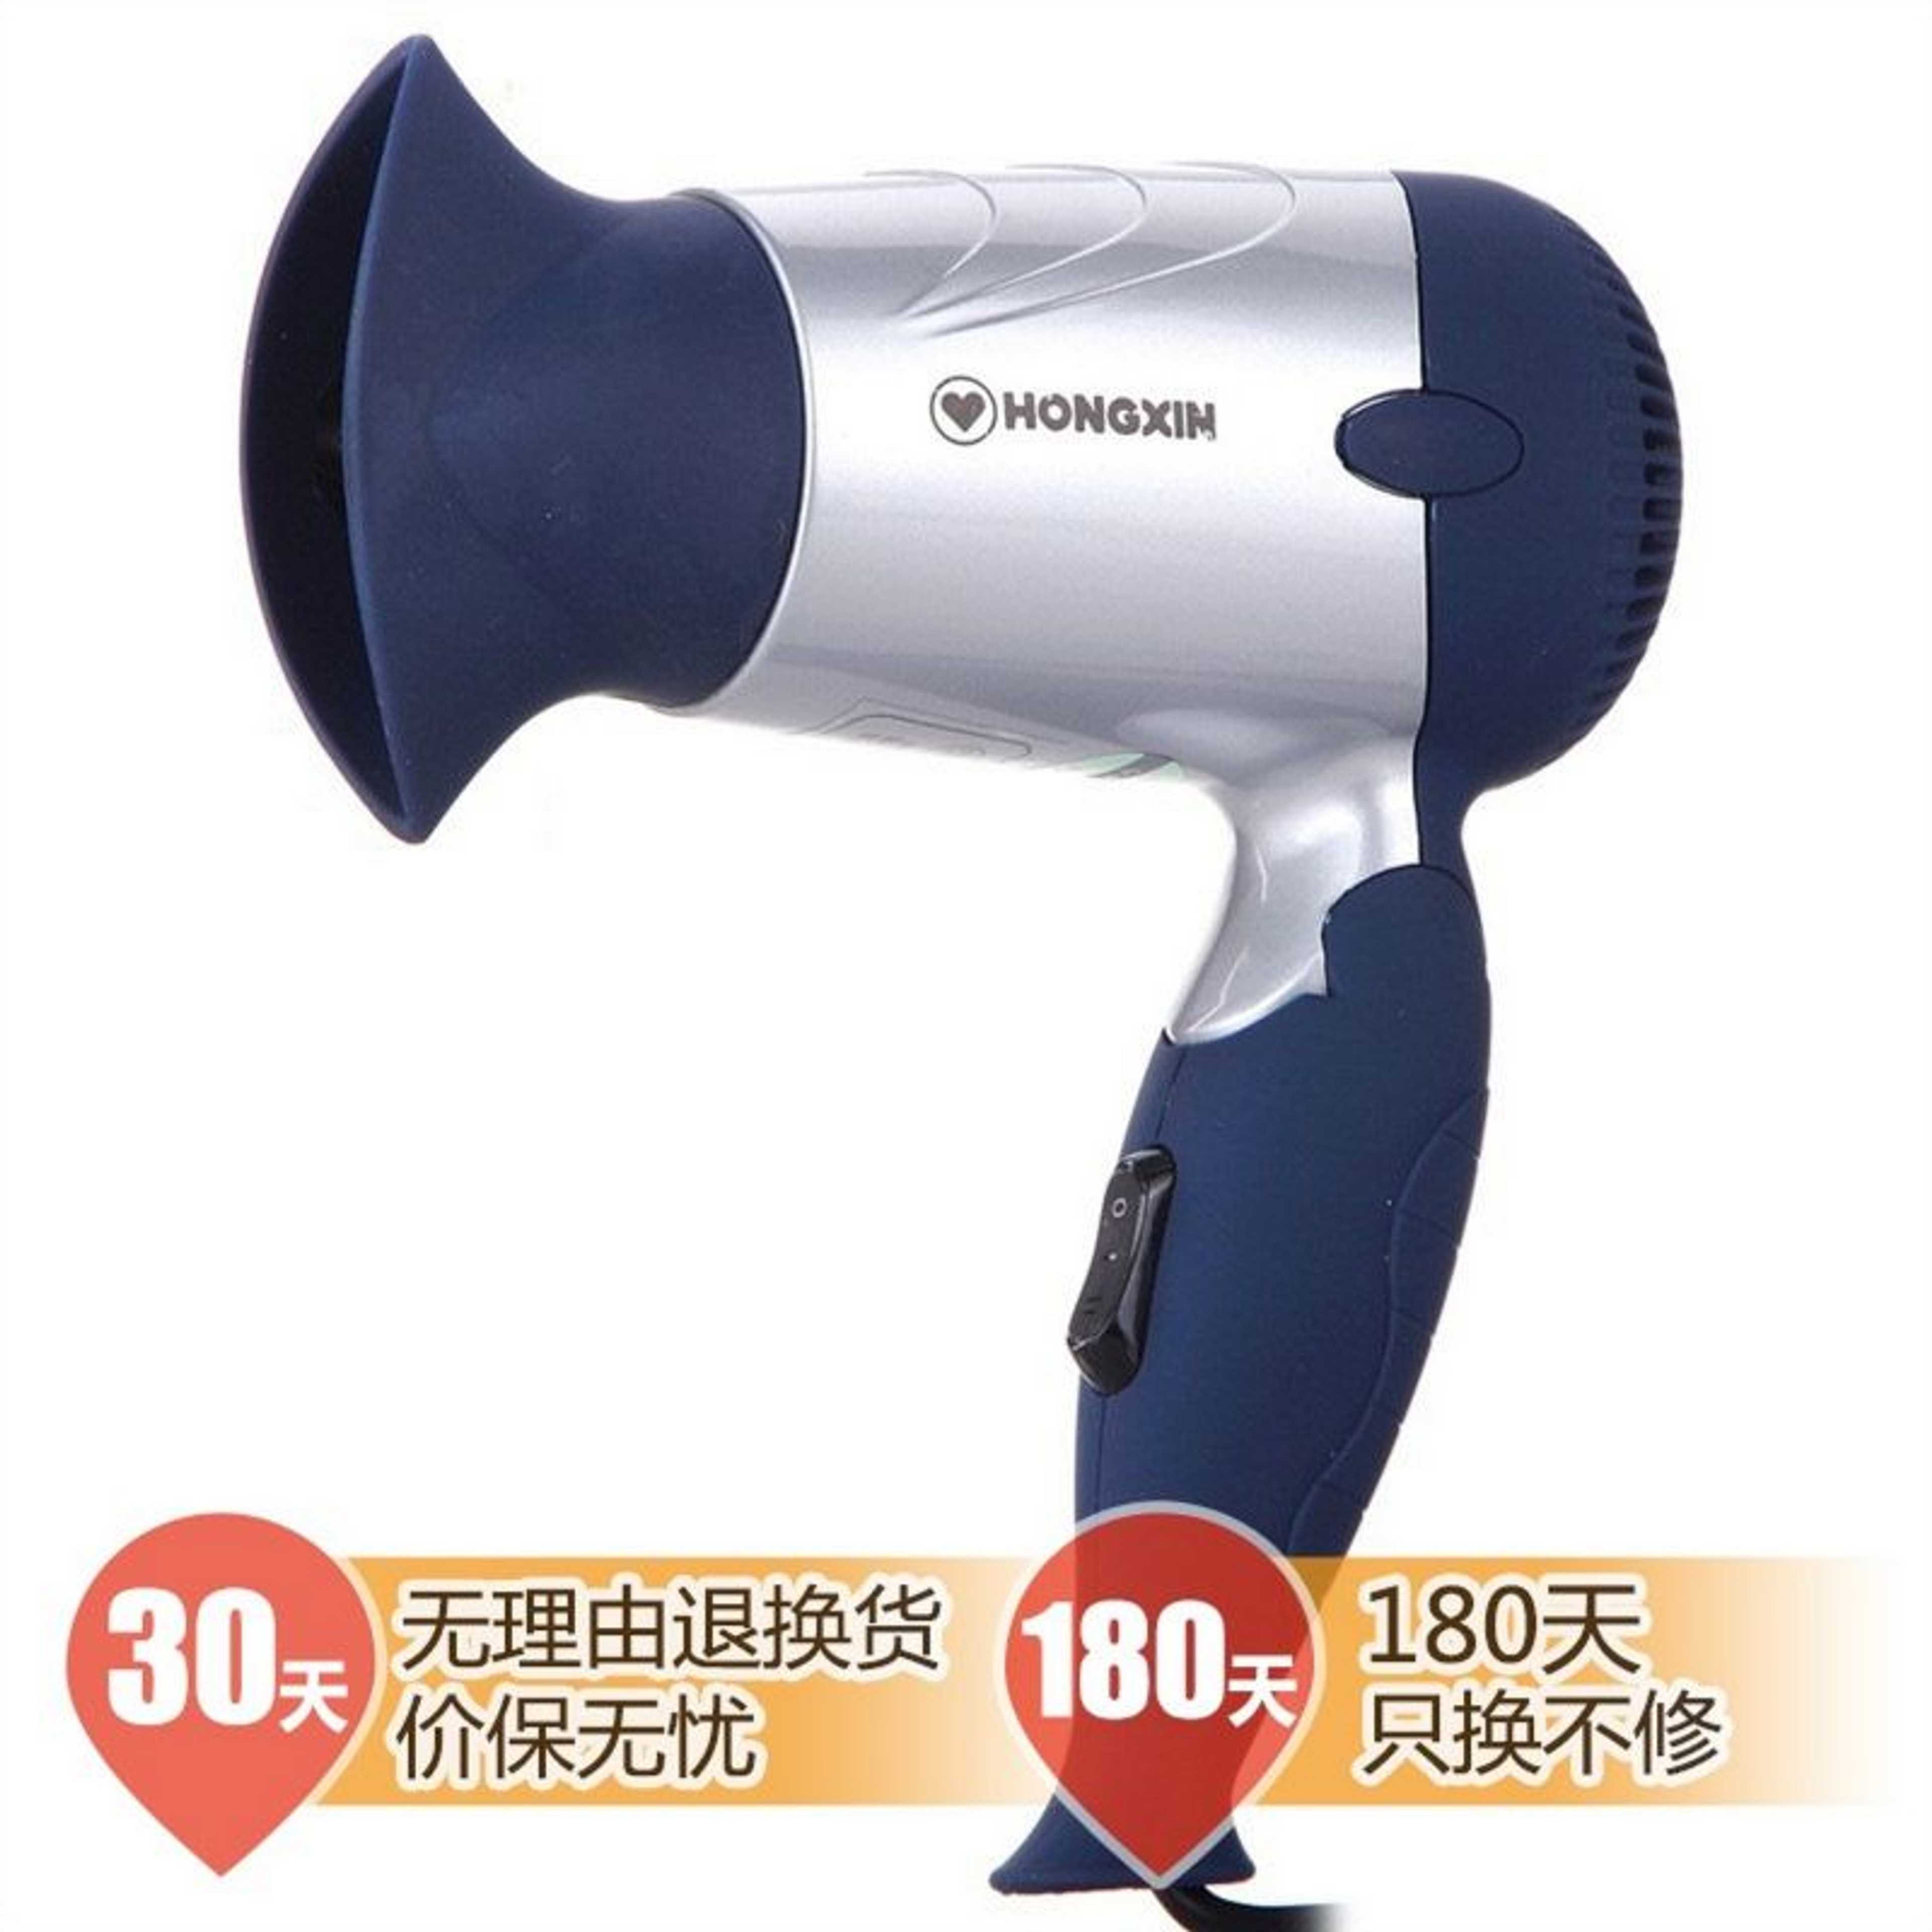 Electric Hongxin RH7188 mini portable hair foldable orignal dryer for woman man girl boy best in lowest price Foldable Hair foldable orignal dryer for Men And Woman use Multicolours